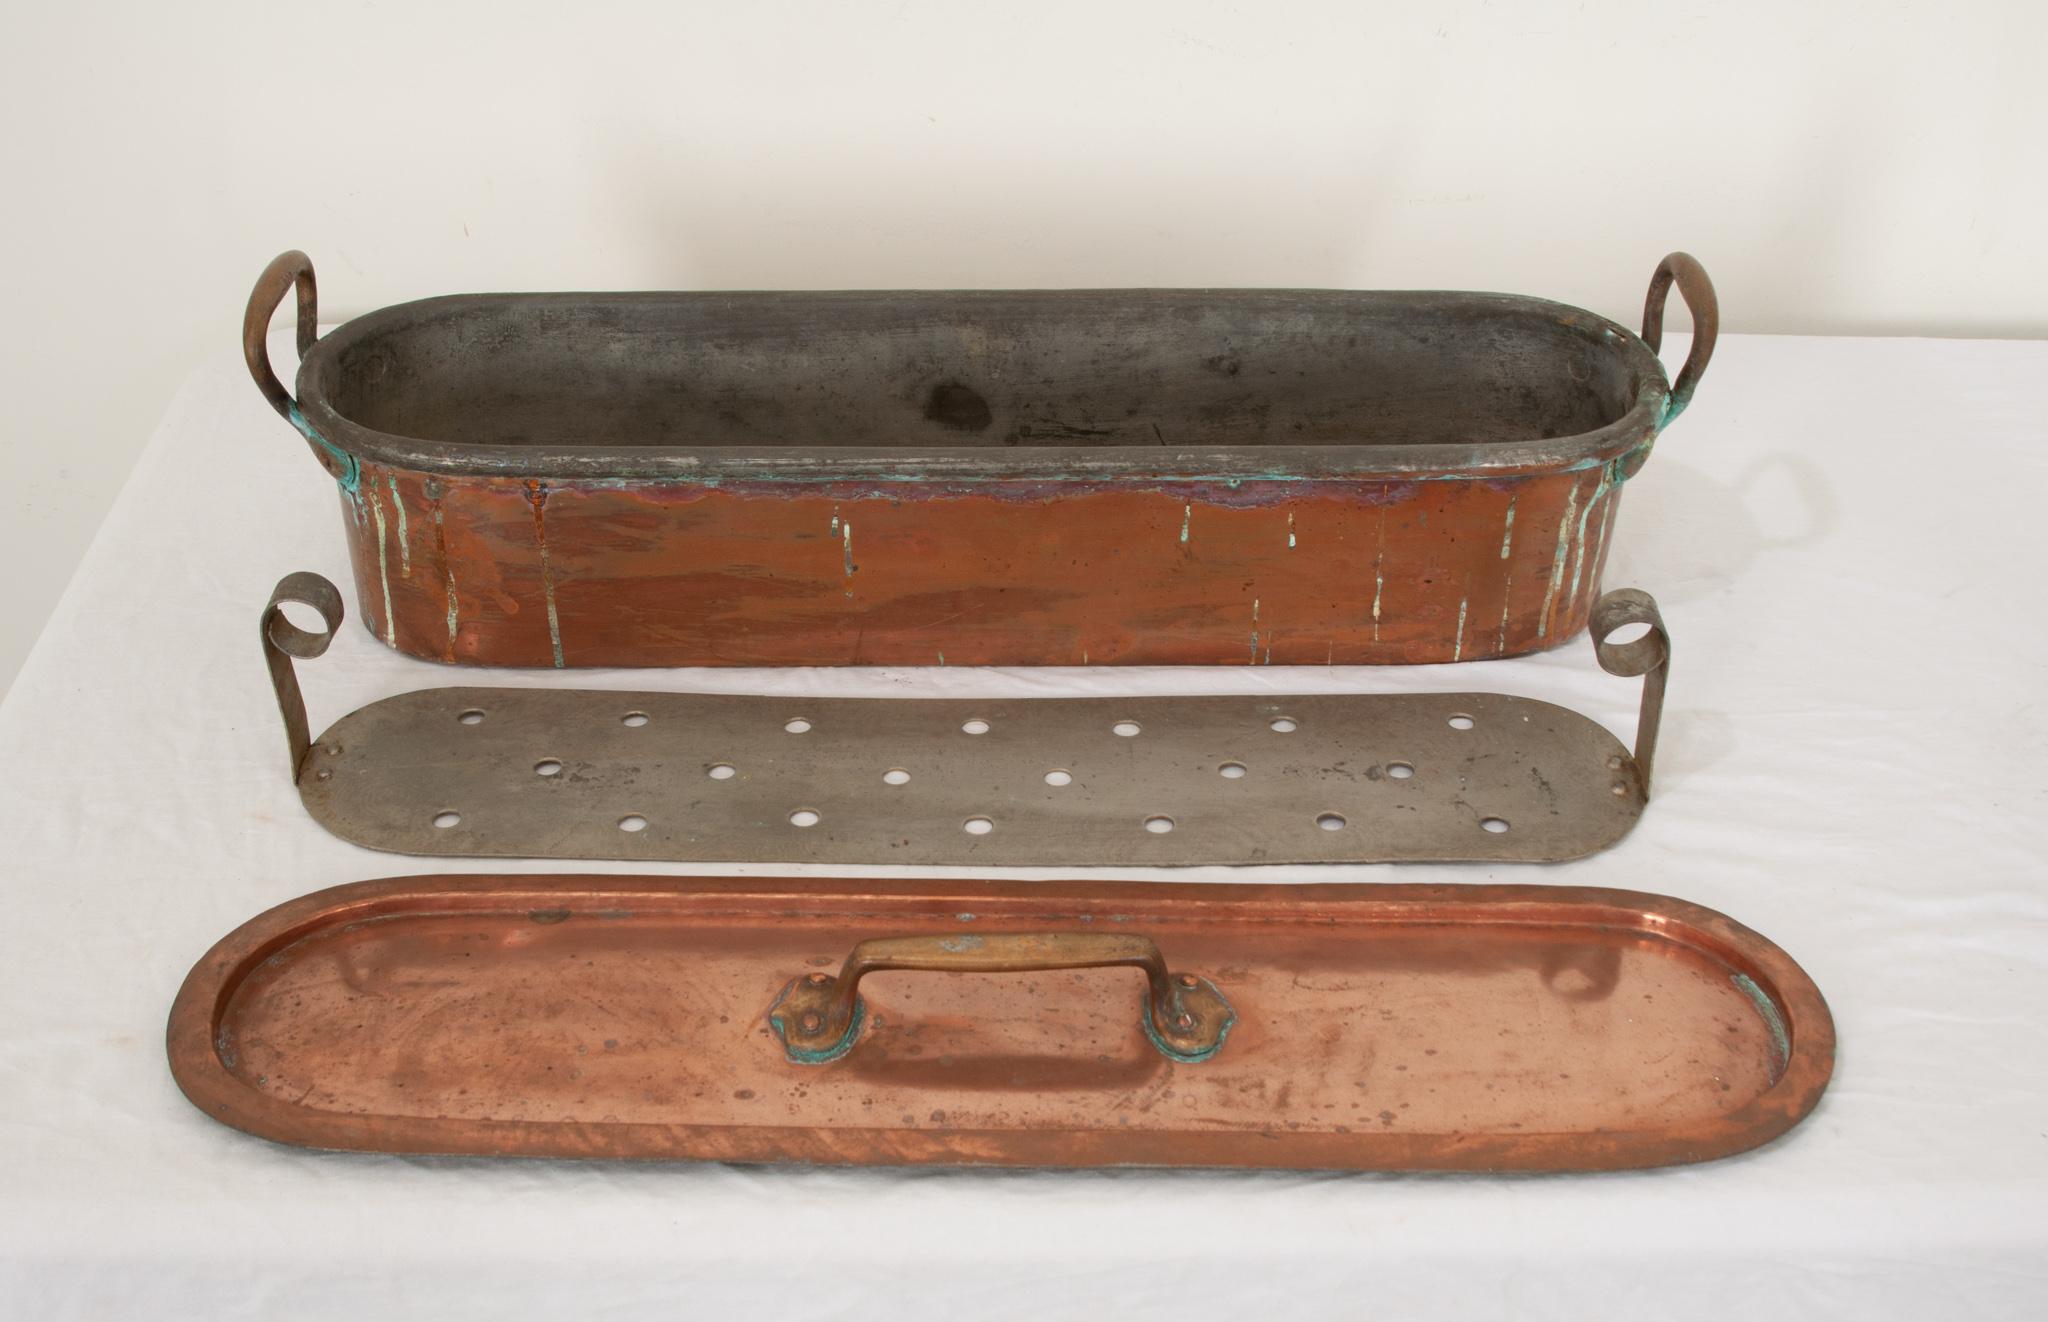 A fabulous French 19th century copper poissonniere or fish kettle. This long and extremely heavy rectangular pot was crafted of solid copper and retains its three large original handles attached with rivets and interior removable zinc grille liner.